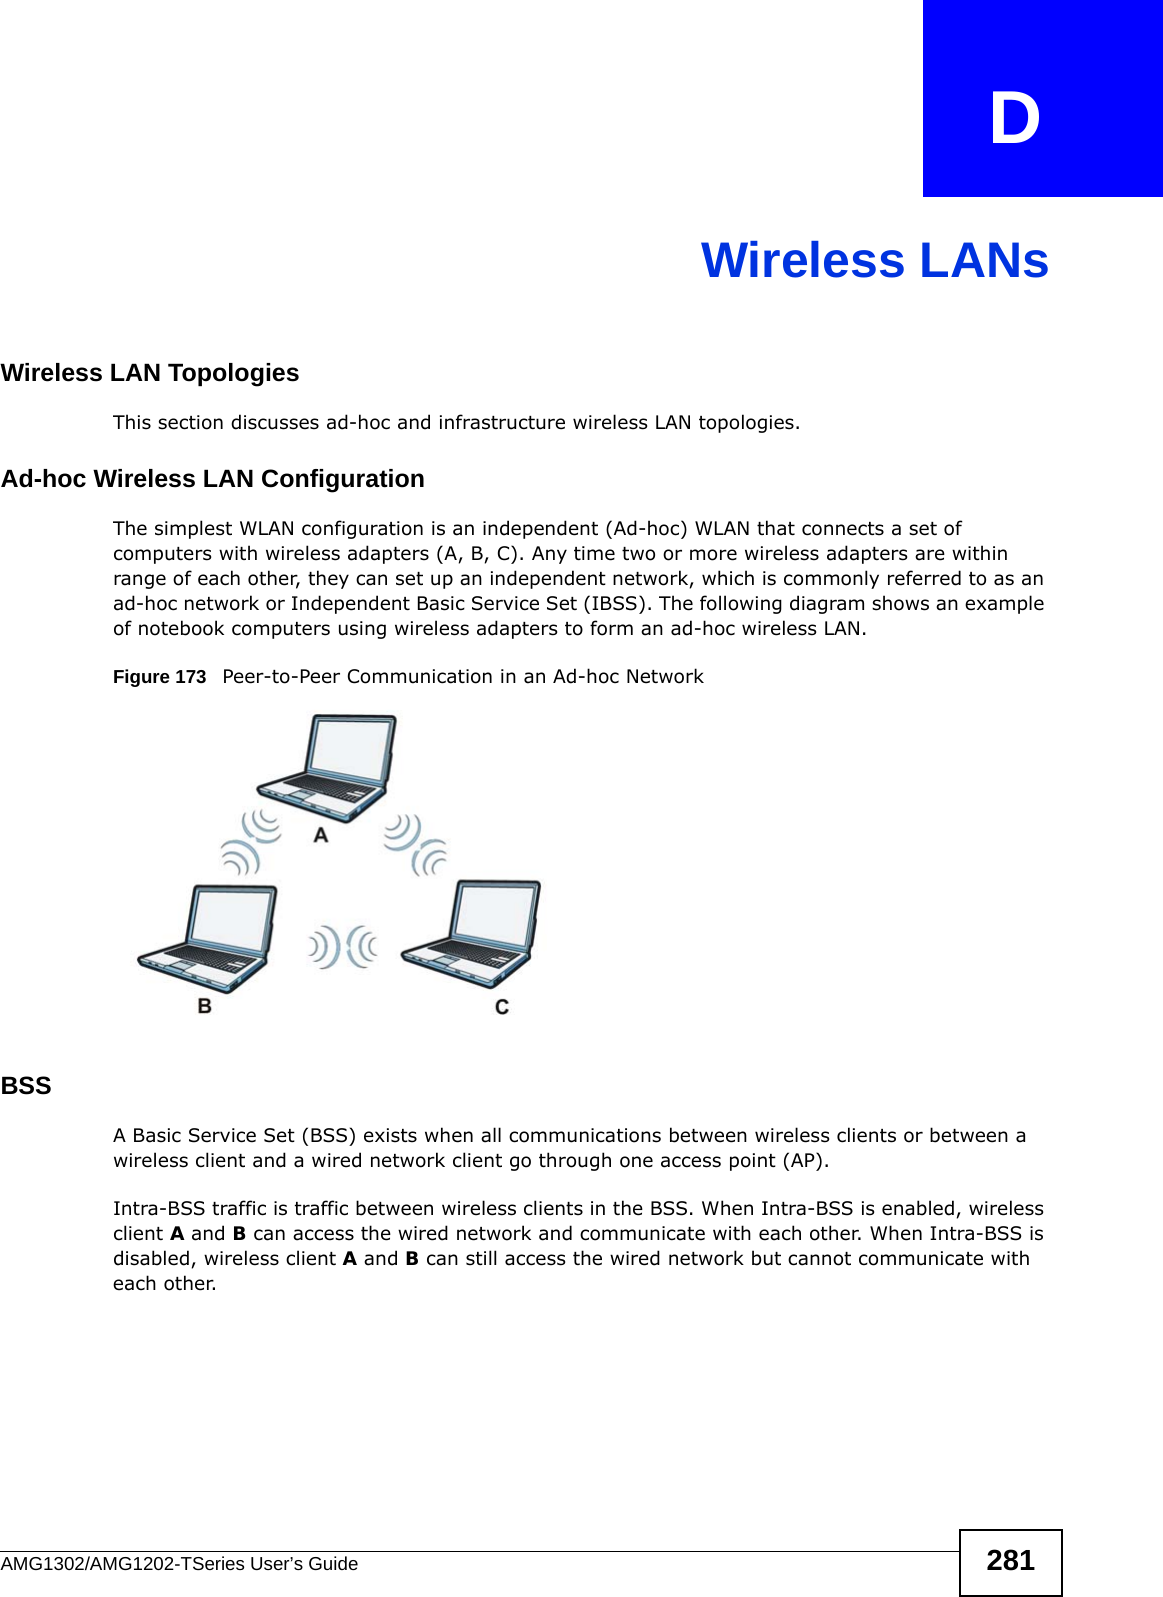 AMG1302/AMG1202-TSeries User’s Guide 281APPENDIX   DWireless LANsWireless LAN TopologiesThis section discusses ad-hoc and infrastructure wireless LAN topologies.Ad-hoc Wireless LAN ConfigurationThe simplest WLAN configuration is an independent (Ad-hoc) WLAN that connects a set of computers with wireless adapters (A, B, C). Any time two or more wireless adapters are within range of each other, they can set up an independent network, which is commonly referred to as an ad-hoc network or Independent Basic Service Set (IBSS). The following diagram shows an example of notebook computers using wireless adapters to form an ad-hoc wireless LAN. Figure 173   Peer-to-Peer Communication in an Ad-hoc NetworkBSSA Basic Service Set (BSS) exists when all communications between wireless clients or between a wireless client and a wired network client go through one access point (AP). Intra-BSS traffic is traffic between wireless clients in the BSS. When Intra-BSS is enabled, wireless client A and B can access the wired network and communicate with each other. When Intra-BSS is disabled, wireless client A and B can still access the wired network but cannot communicate with each other.